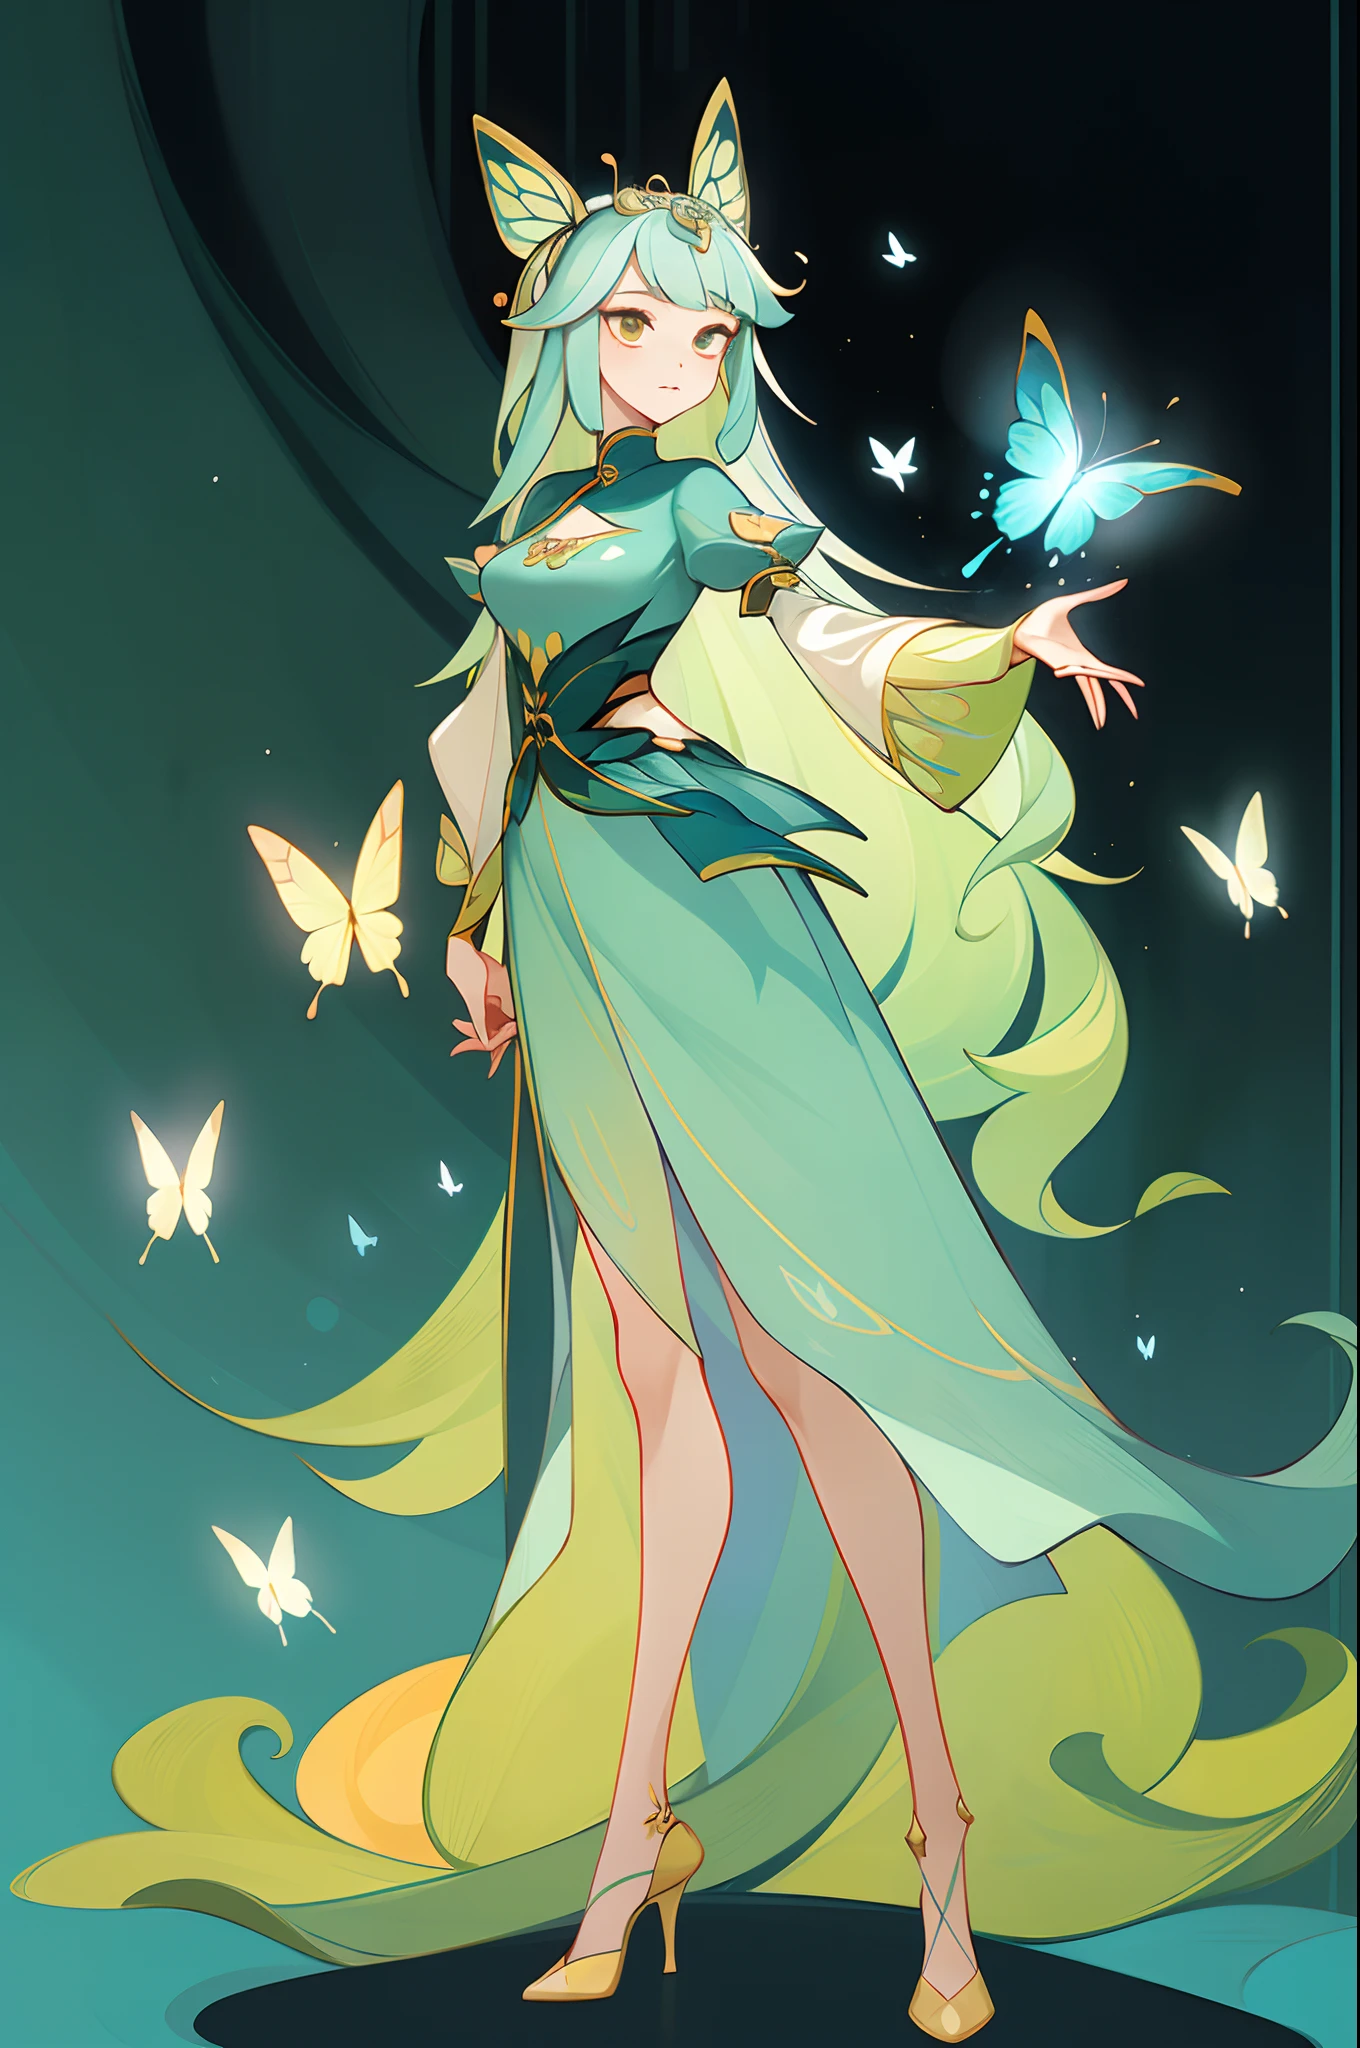 (1 Anthropomorphism of butterflies), (standing full-body), (Full body standing painting), 1 Princess，(standing full-body)，solo, long  skirt，character  design, fanciful, tmasterpiece，top Quority，best qualtiy，Ultra-high resolution，Exquisite facial features